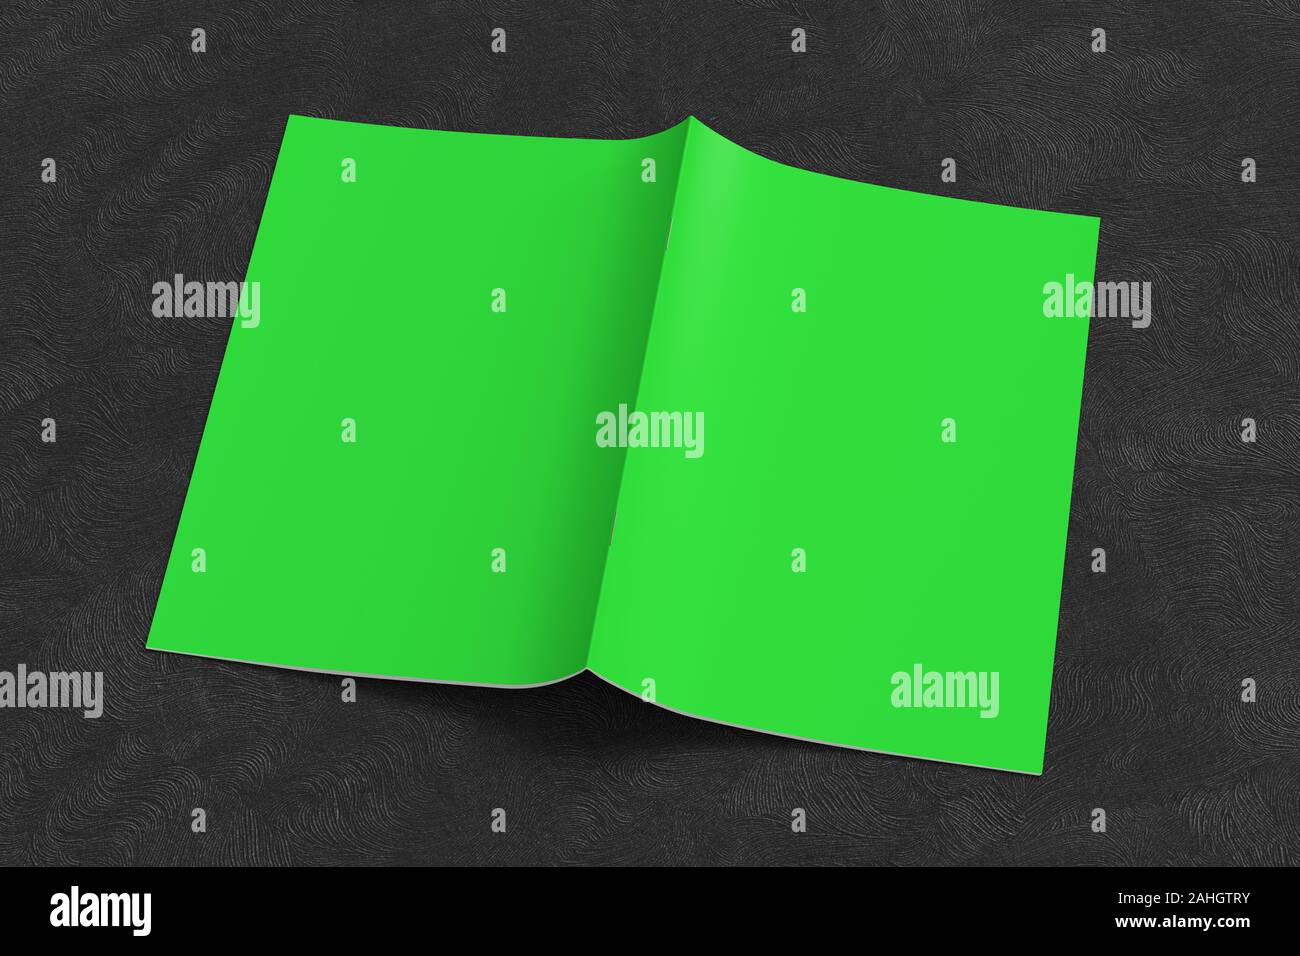 Green brochure or booklet cover mock up on black background. Brochure is open and upside down. Isolated with clipping path around brochure. 3d illustr Stock Photo